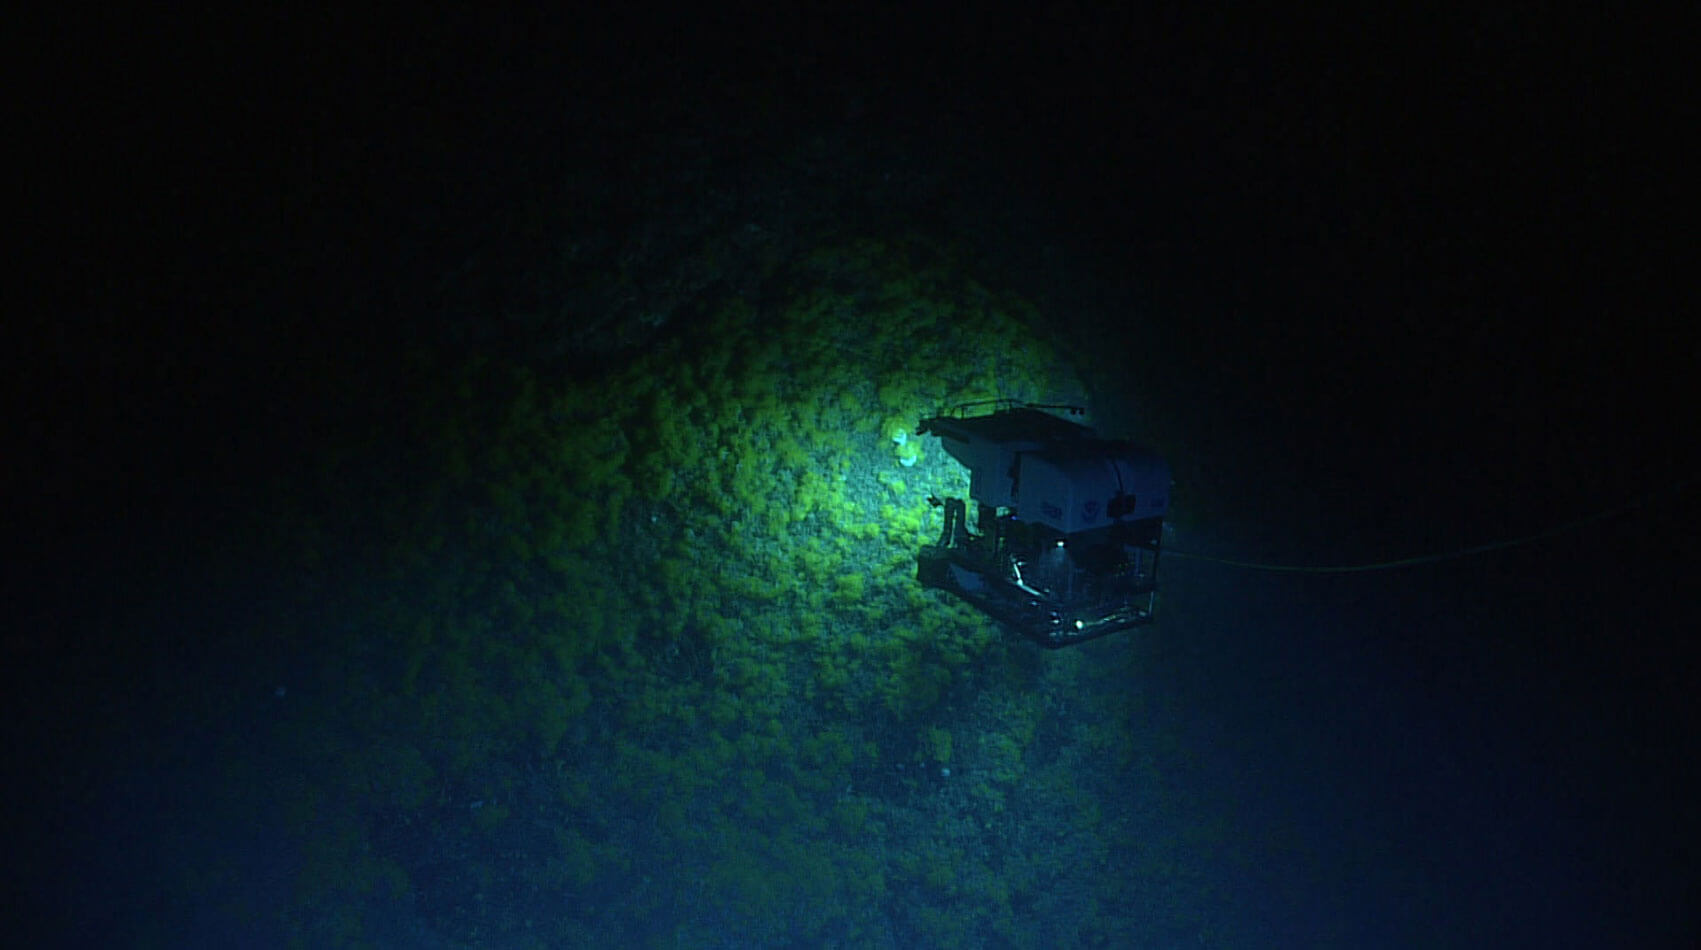 Remotely operated vehicle Deep Discoverer traverses over a field of live, yellow coral in the genus Eguchipsammia growing over the top of dead coral rubble seen during much of Dive 01 of the second Voyage to the Ridge 2022 expedition.